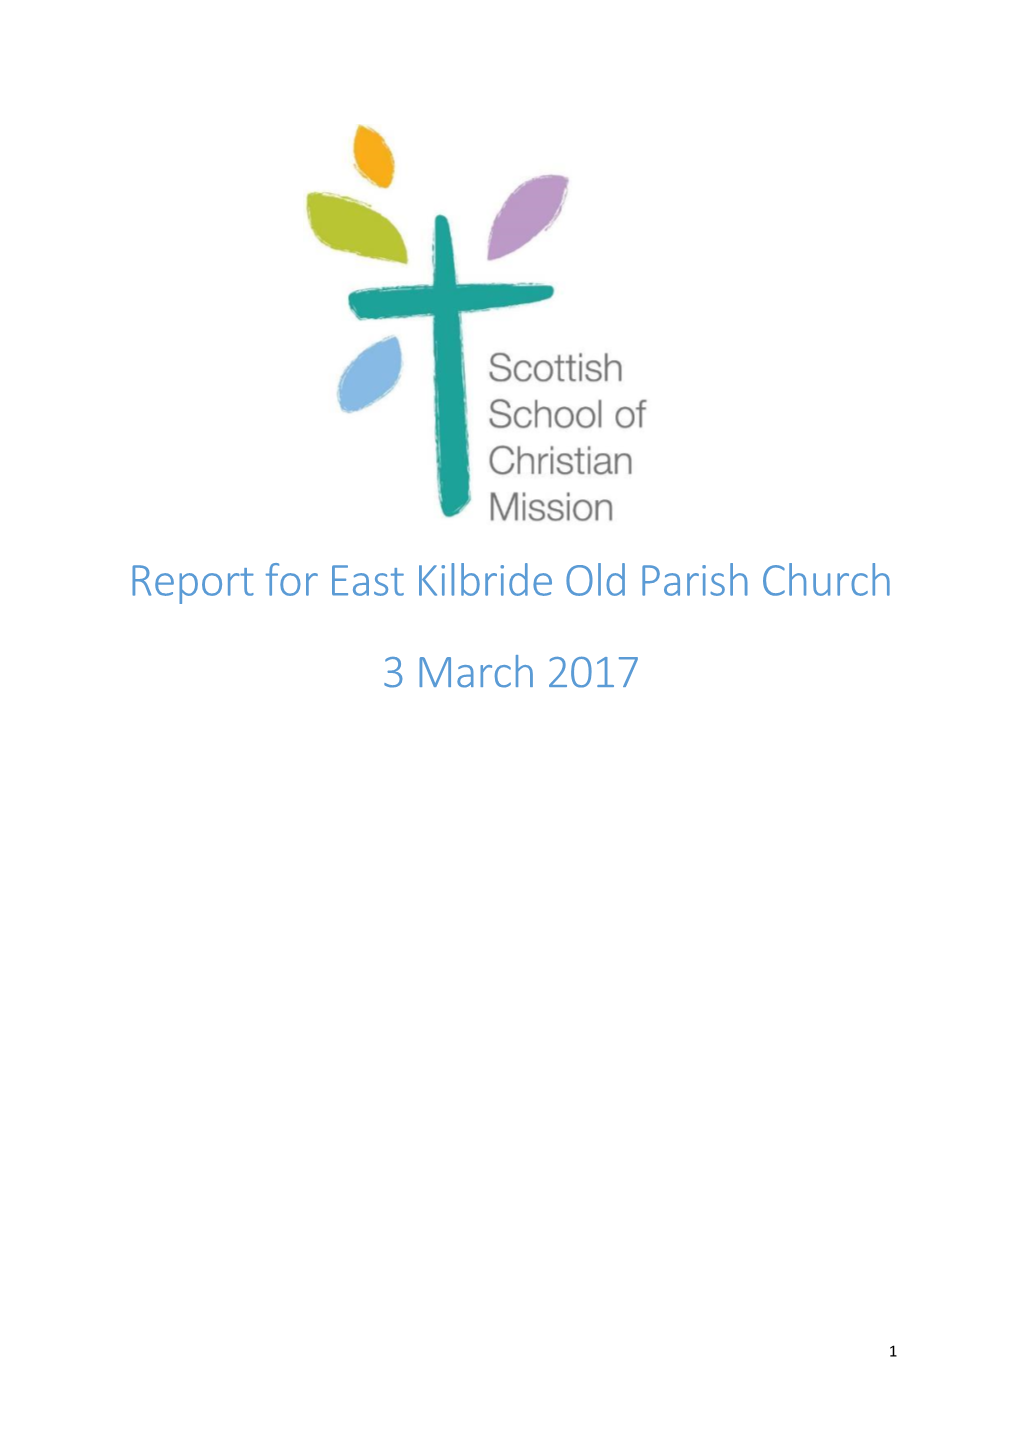 Report for East Kilbride Old Parish Church 3 March 2017